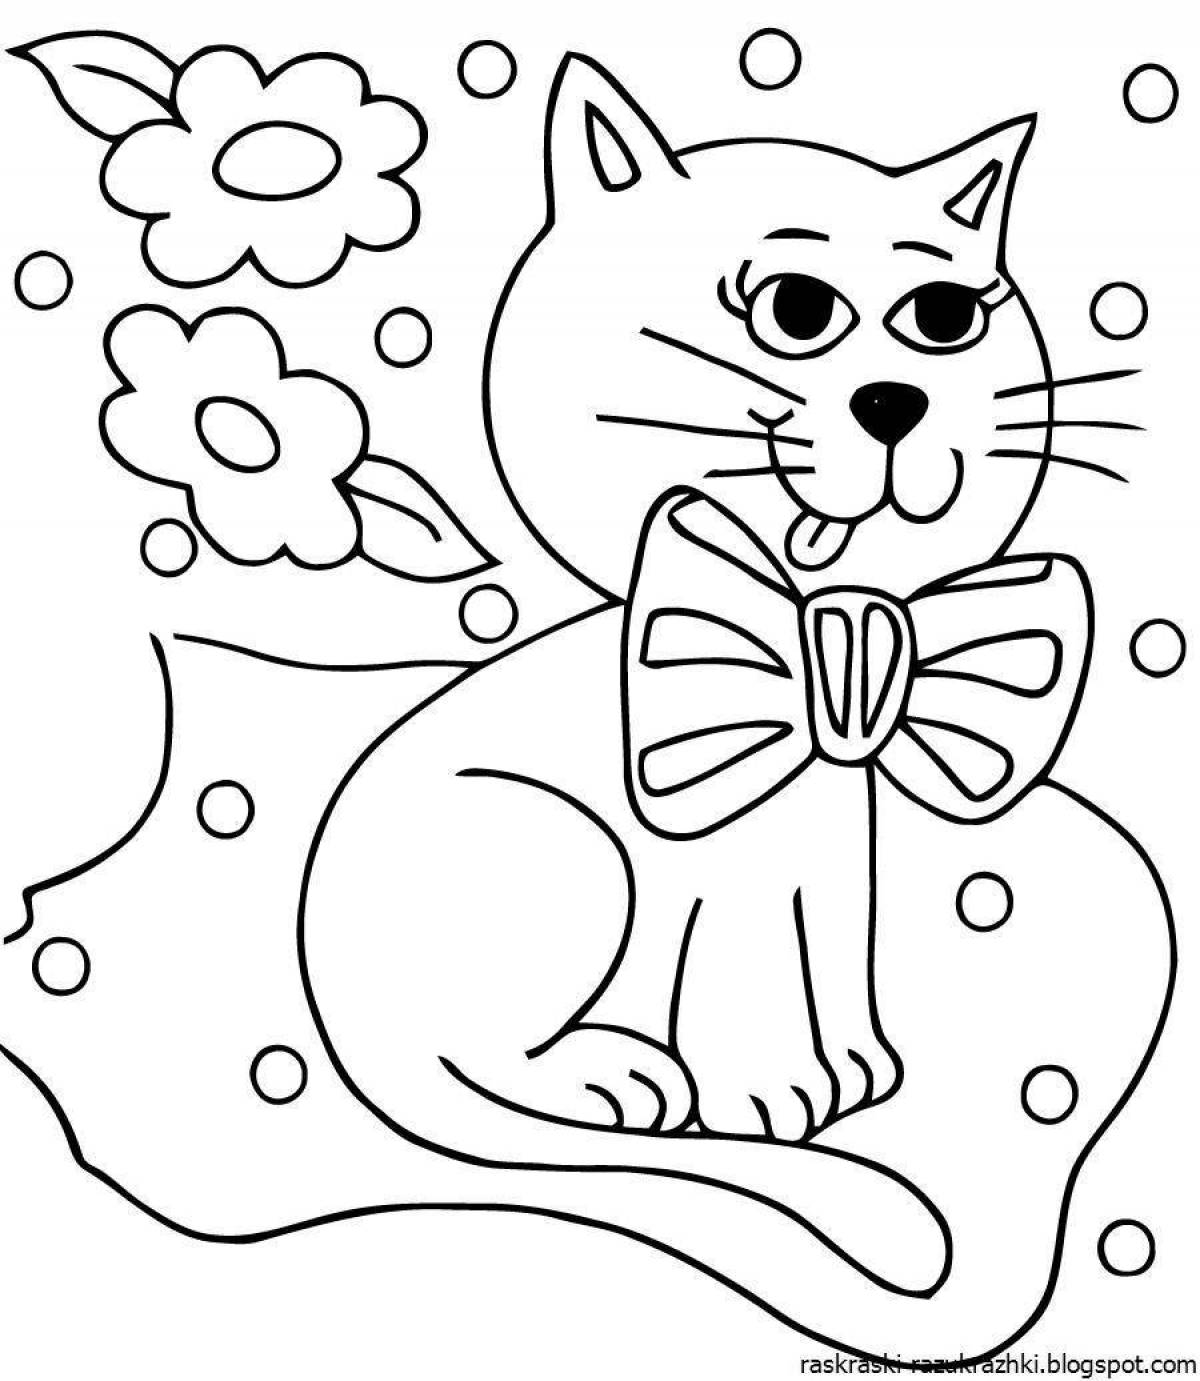 Adorable cat coloring book for kids 5-6 years old